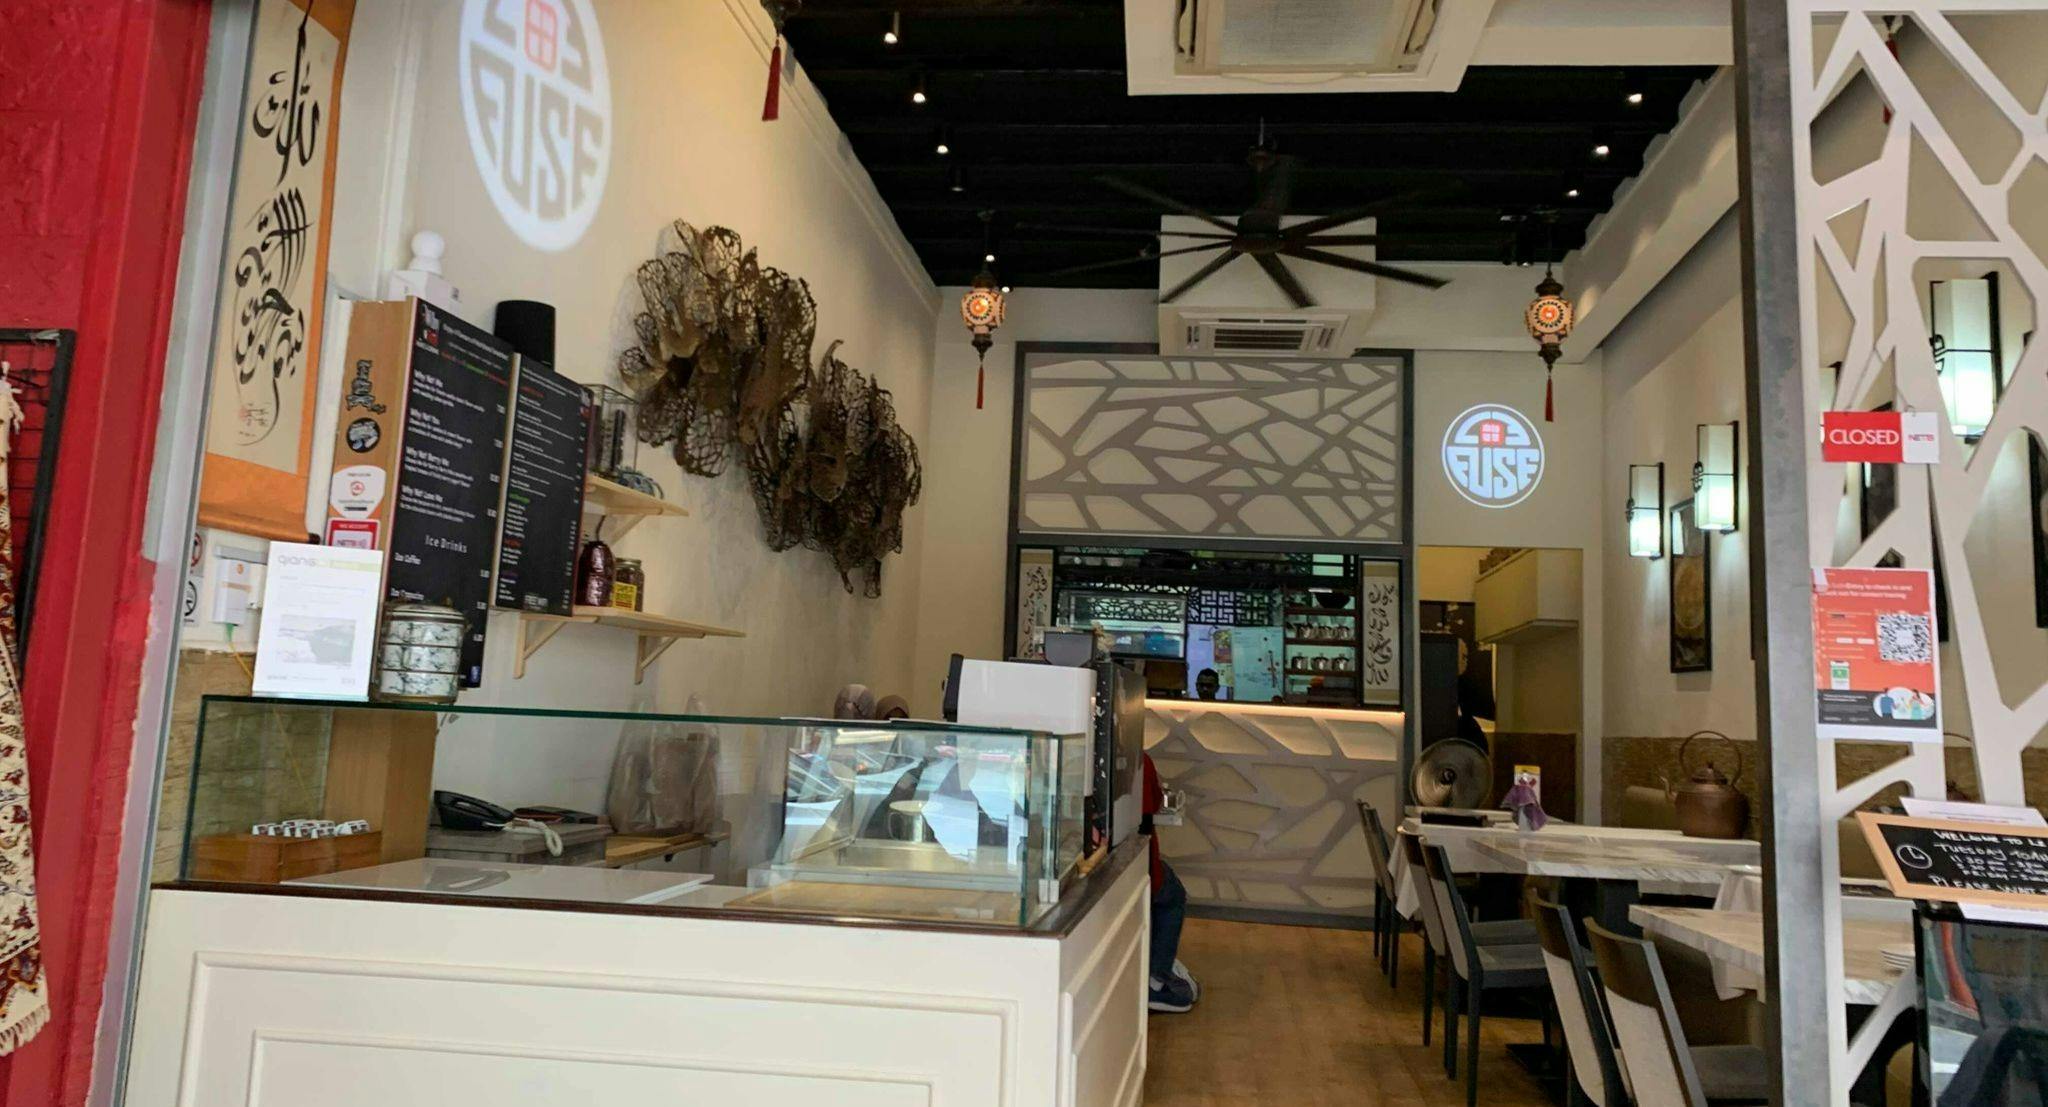 Photo of restaurant Le Fuse Cafe in Kallang, 新加坡